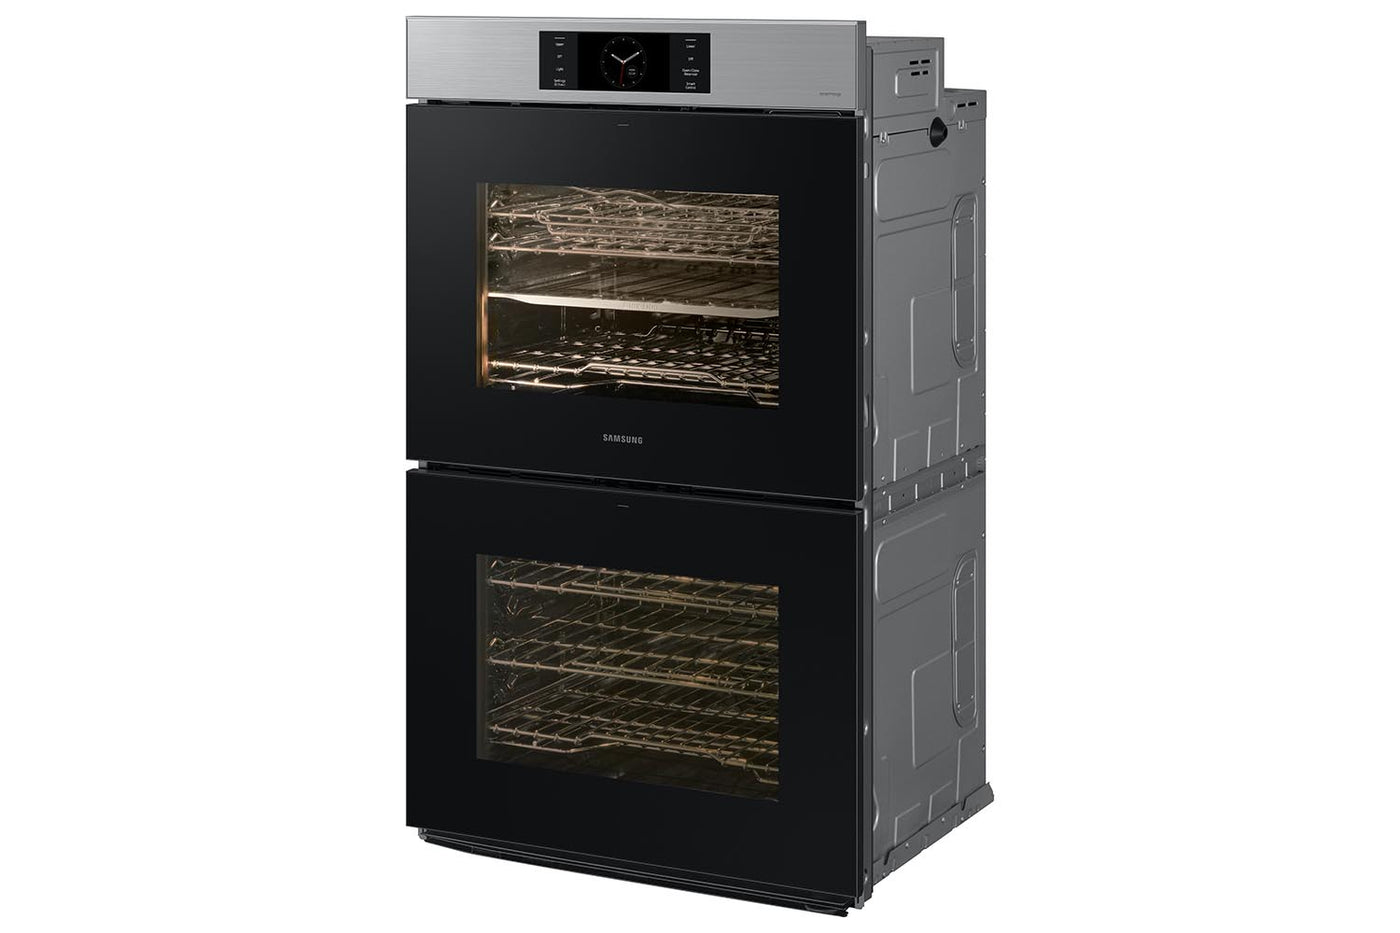 Samsung BESPOKE Stainless Steel Double Wall Oven (10.2 cu. ft) - NV51CG700DSRAA